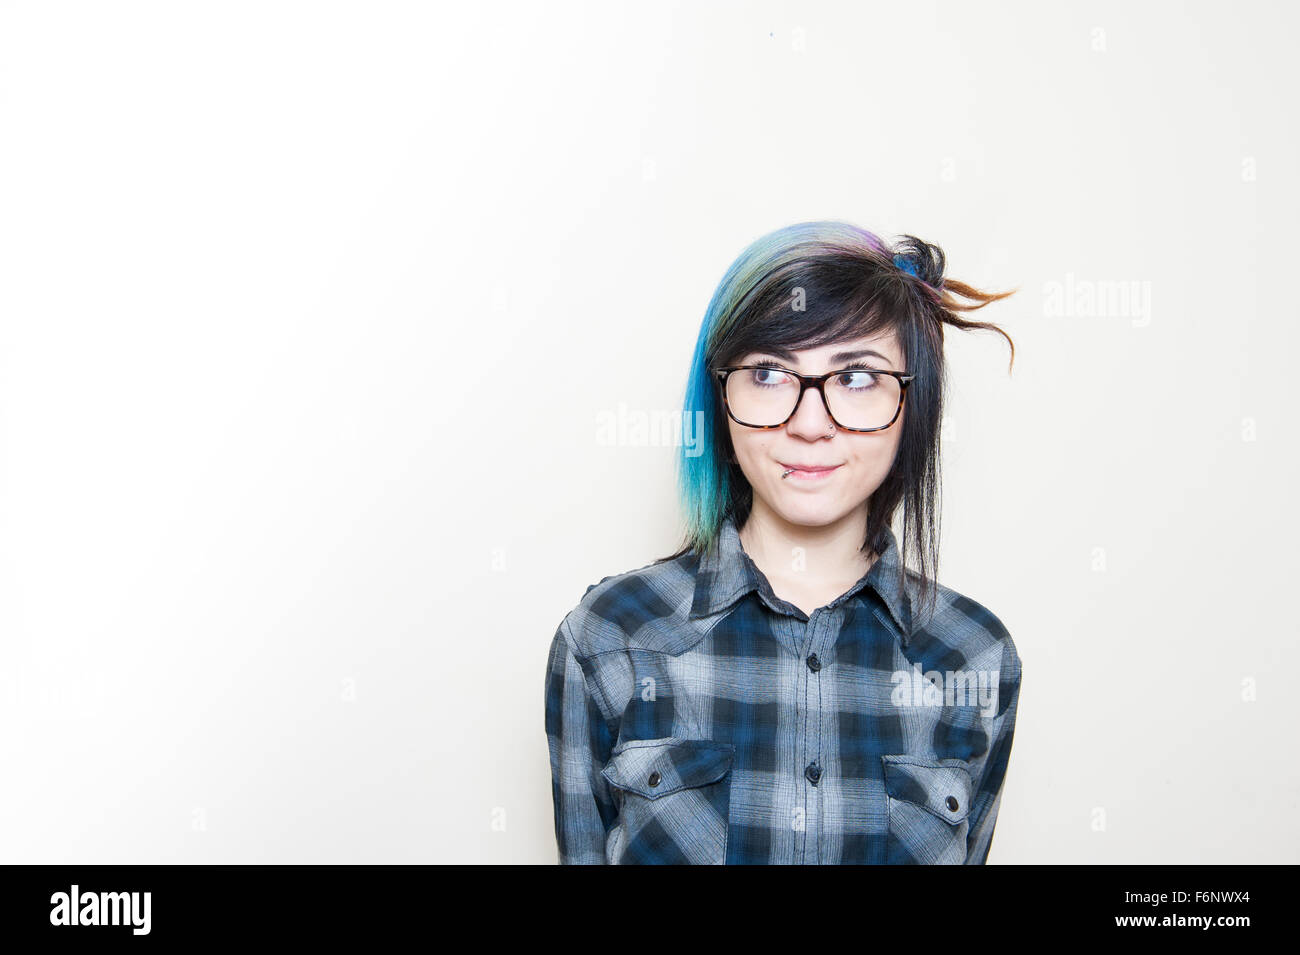 Smiling alternative teen woman in blue shirt looking out on white background Stock Photo